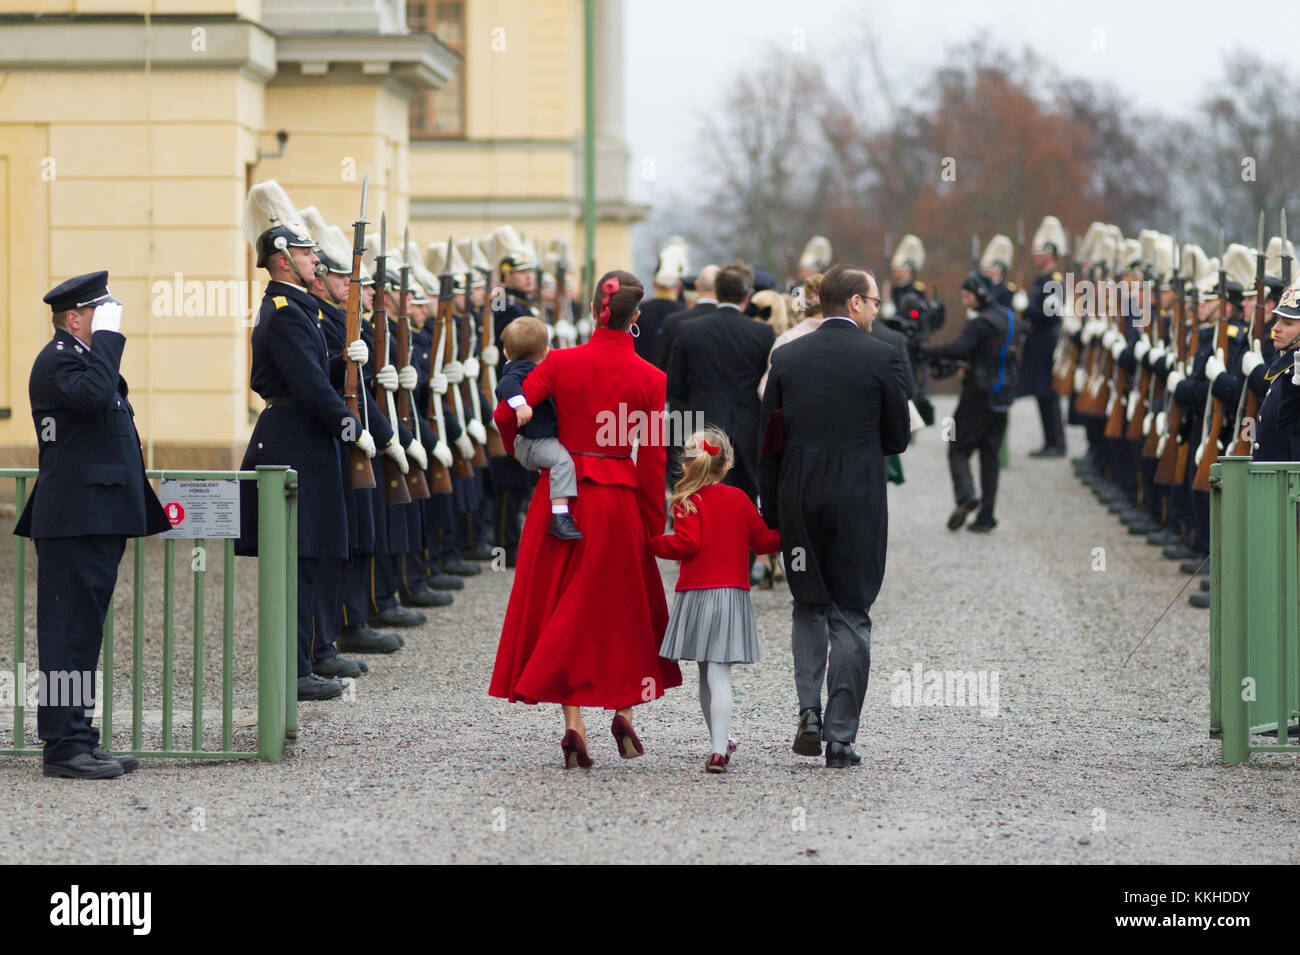 Drottningholm Castle, Stockholm, Sweden. 1st Dec, 2017. HRH Prince GABRIEL Carl Walther is christened in Drottningholm's church today in a cold and snowy Stockholm. Credit: Barbro Bergfeldt/Alamy Live News Stock Photo